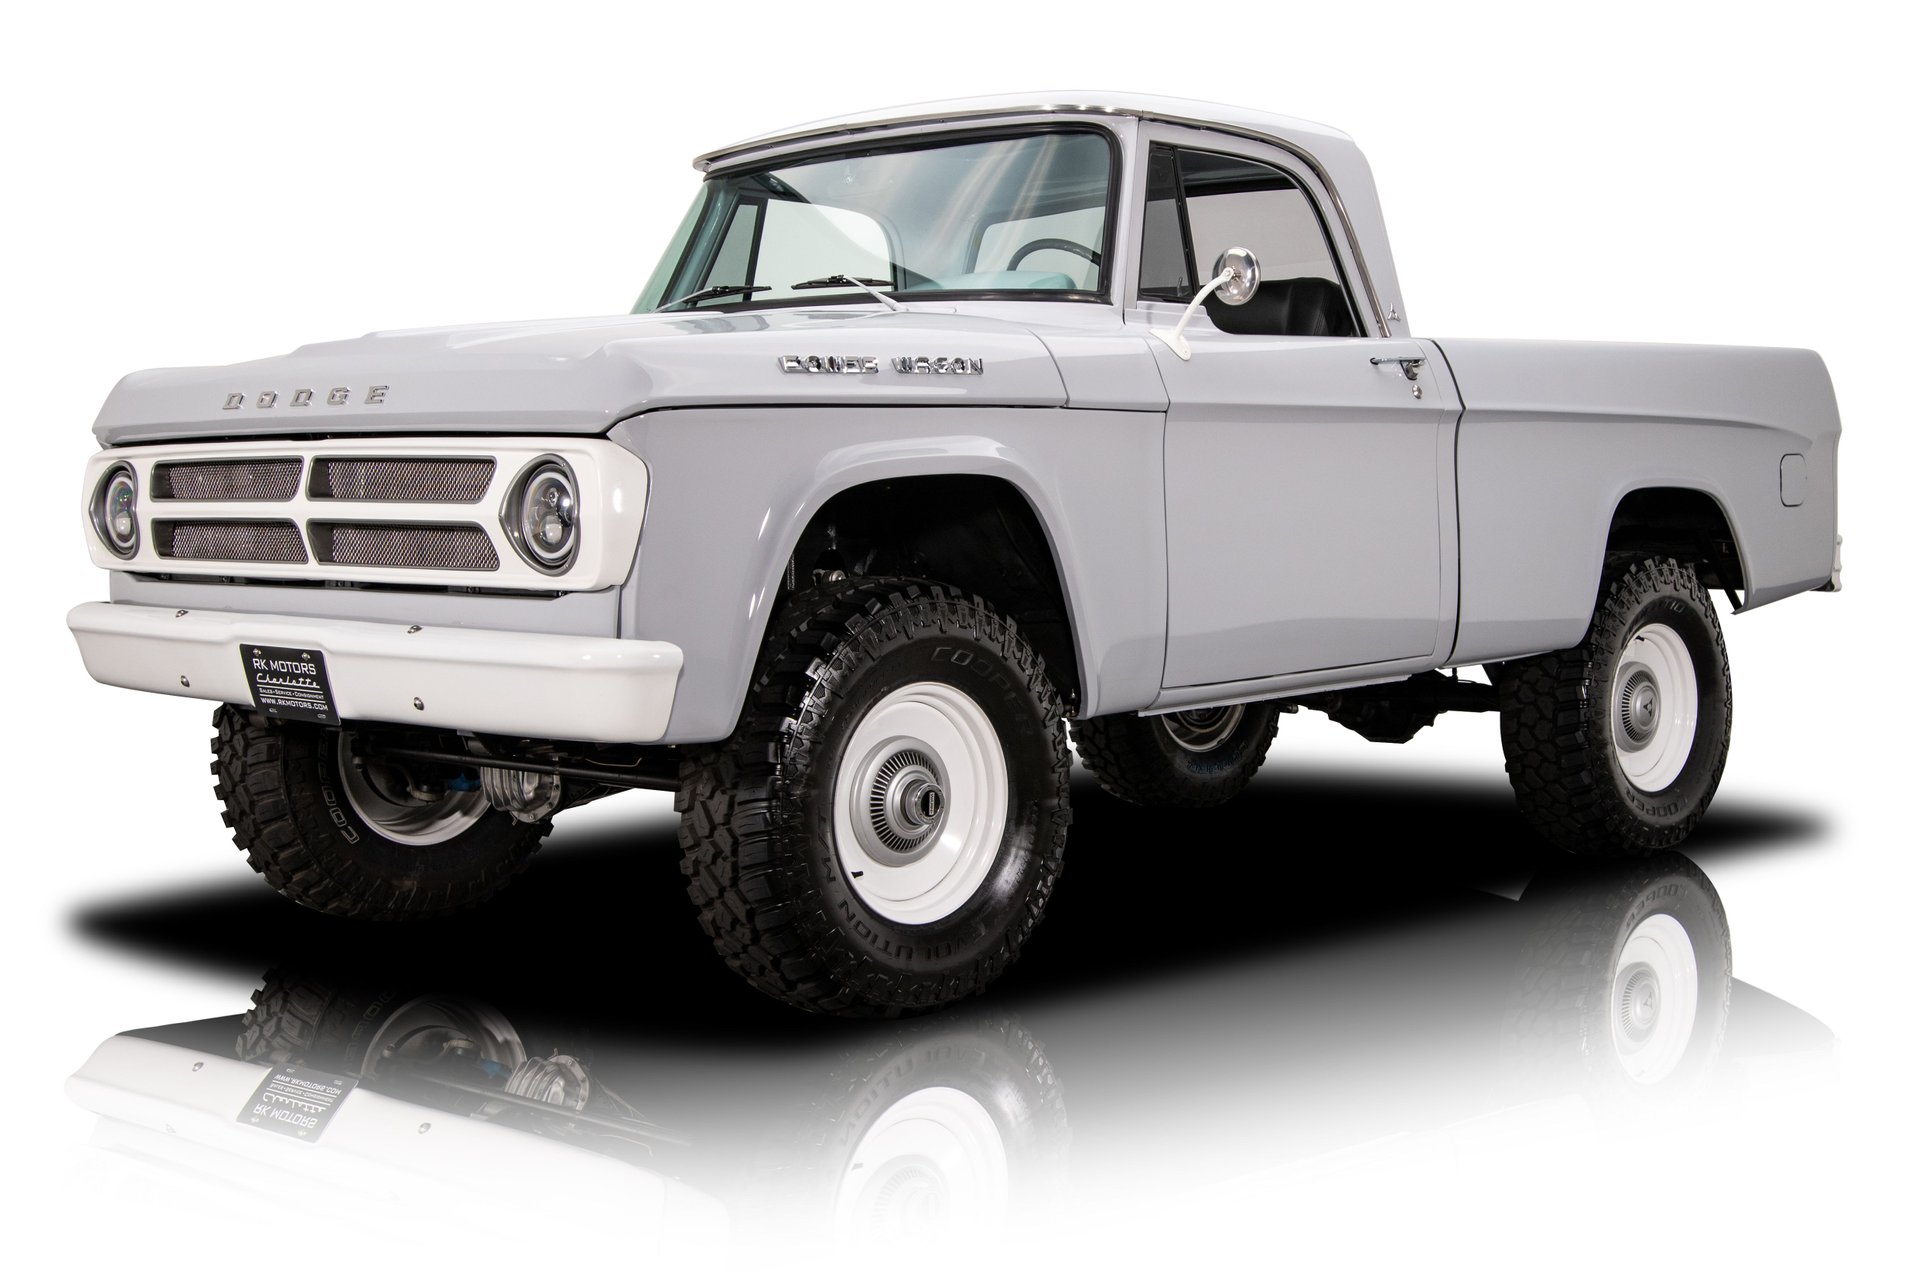 1968 Dodge Power Wagon | RK Motors Classic Cars and Muscle Cars for Sale